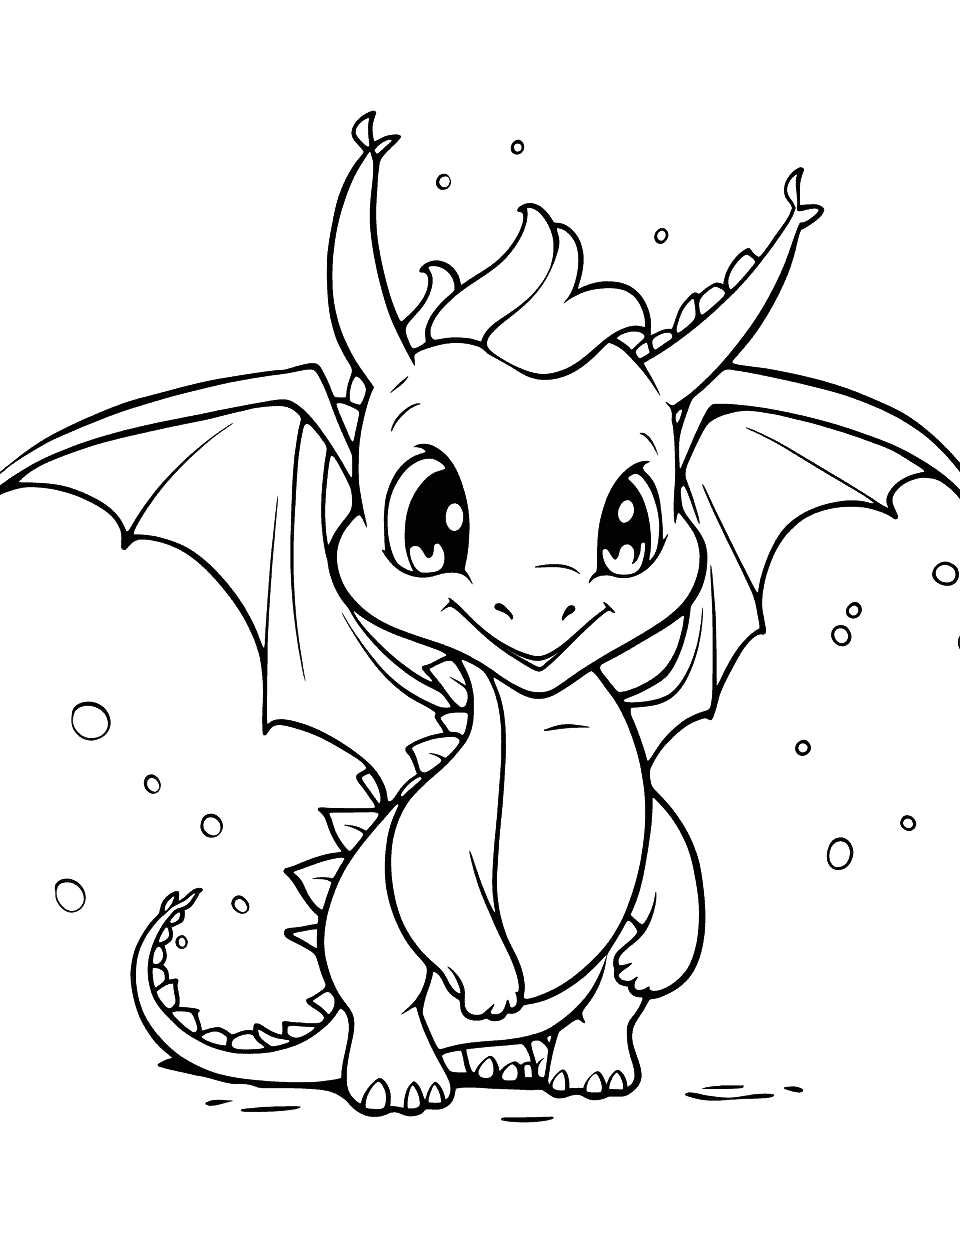 Icewing Baby Dragon Coloring Page - A cute Icewing baby dragon playing with snowflakes.